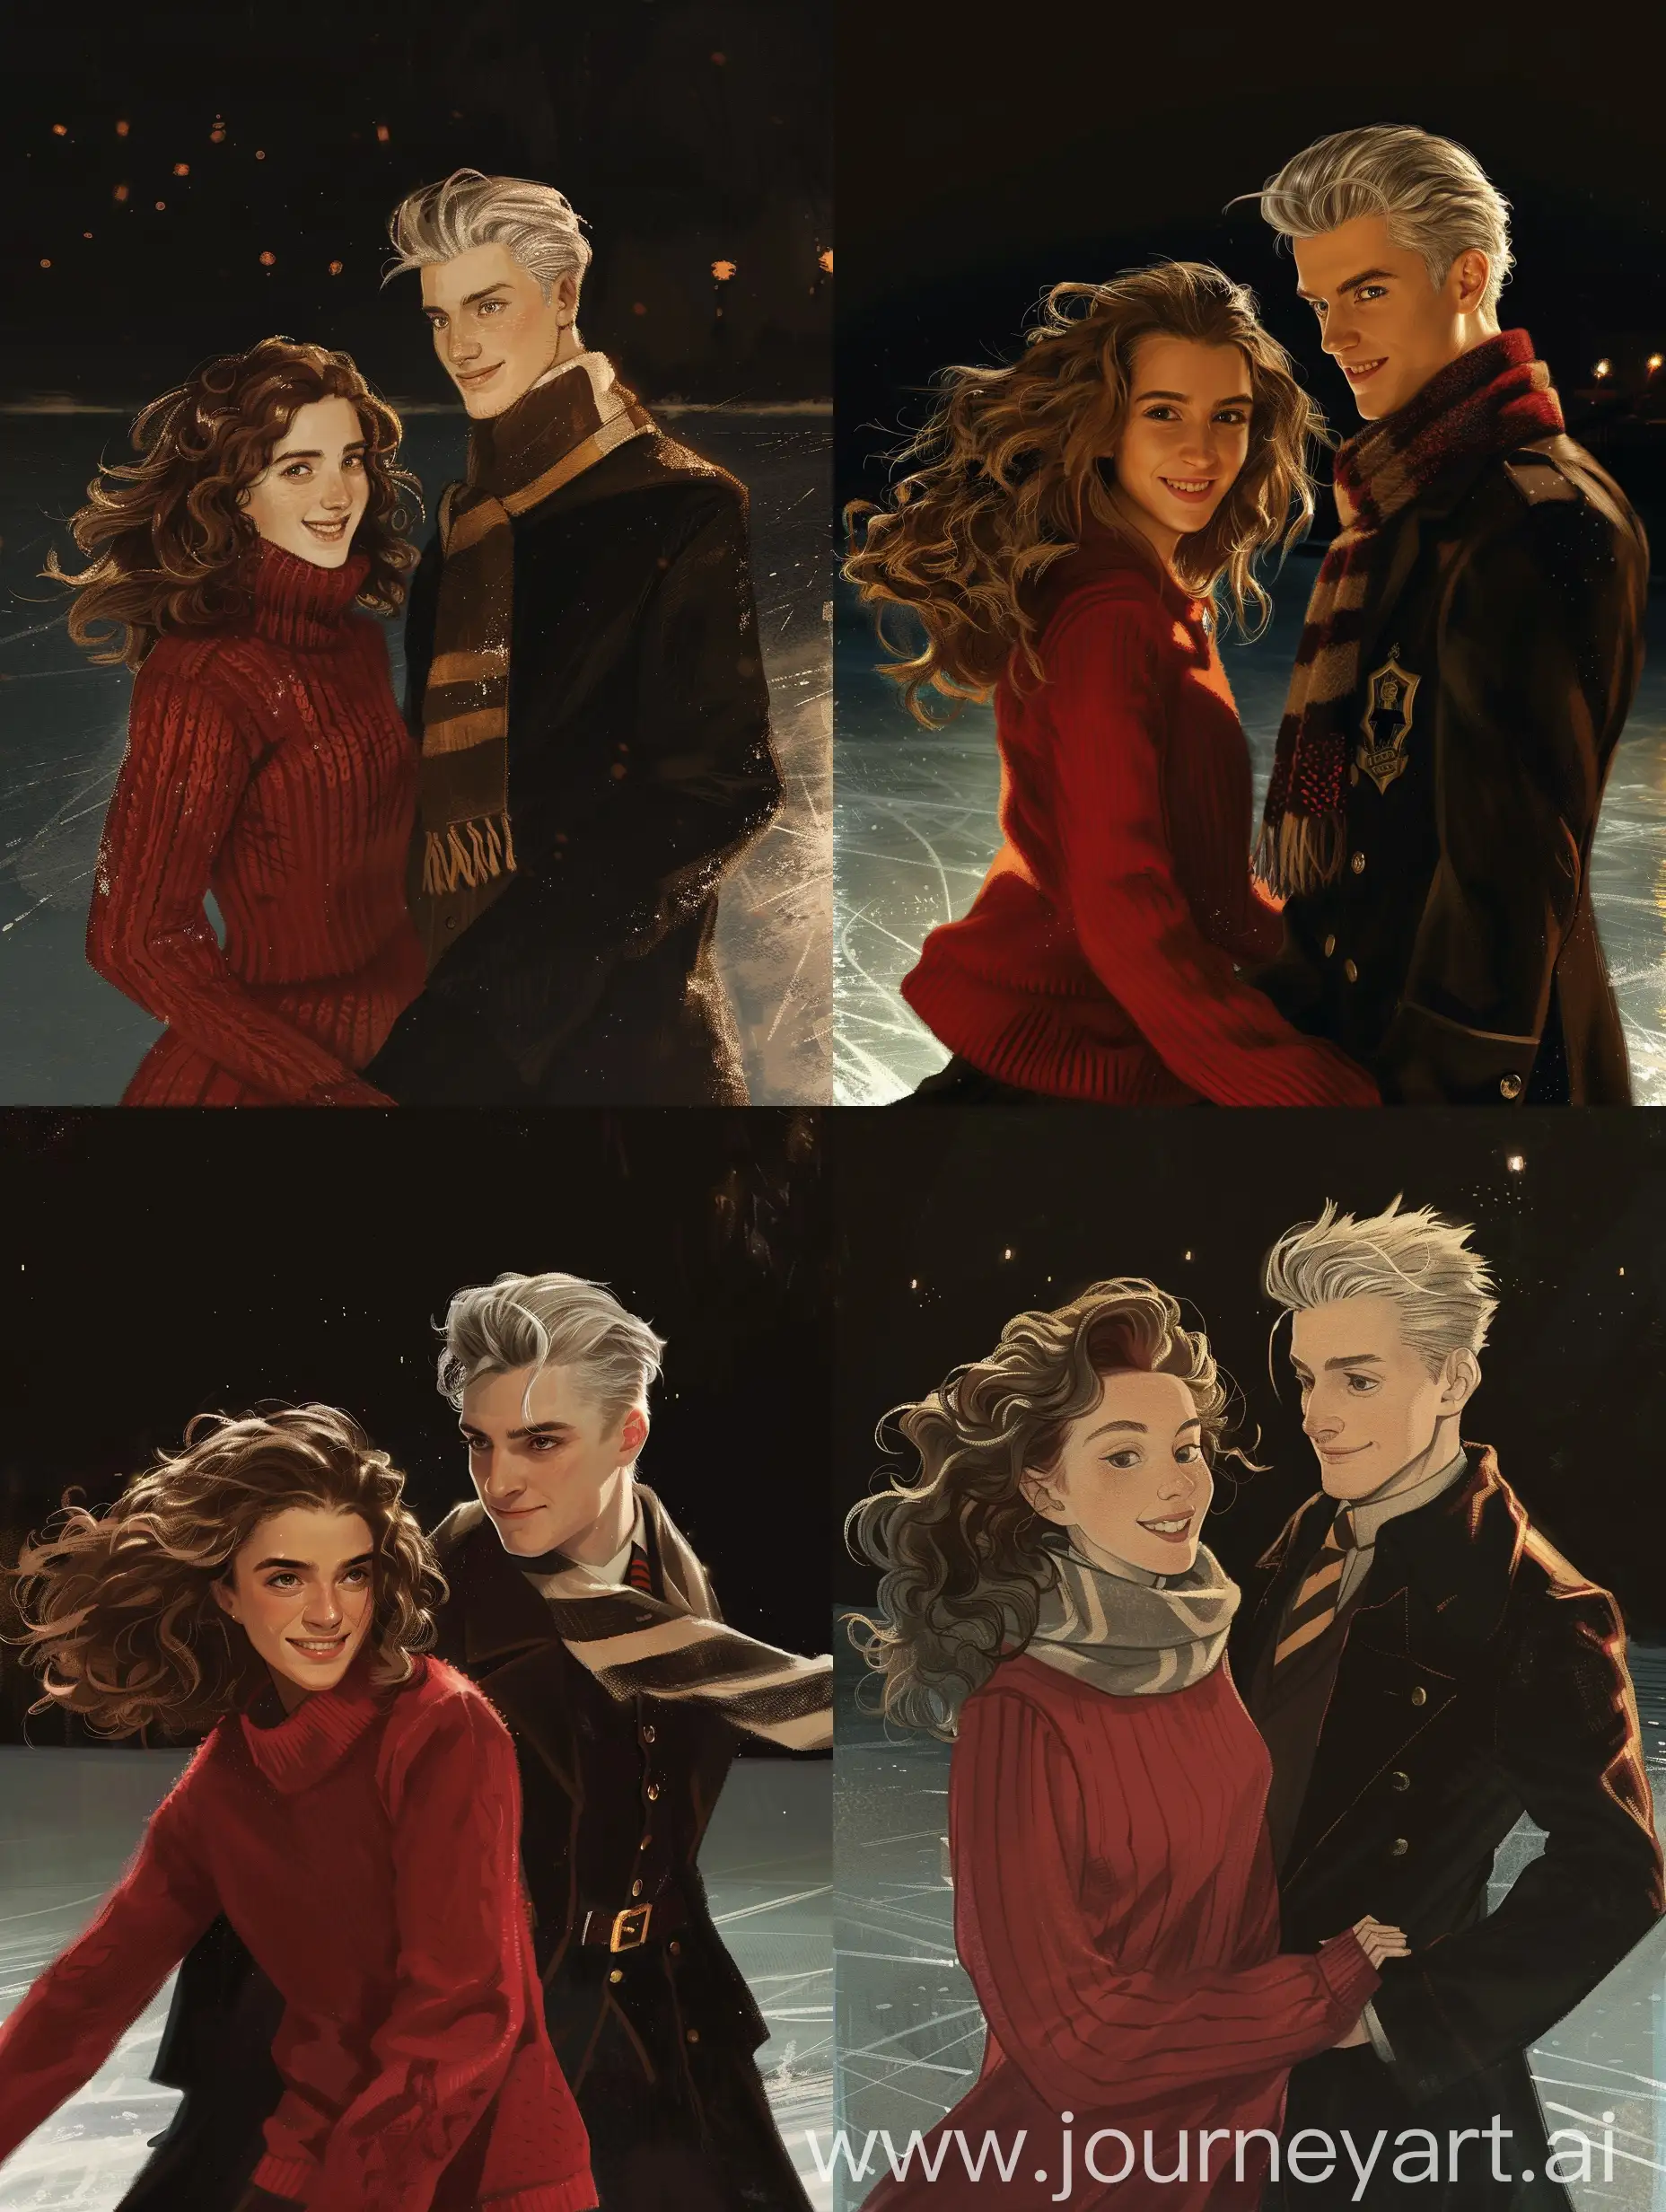 book cover. hermione granger 17 years old and draco malfoy 17 years old. ice skating. night. black lake. hogwarts. warm light. hermione is in warm red sweater, wild curly brown hair and brown eyes. she's shy smiling. draco is serious. platinum blond hair, grey eyes, elegant black coat, slytherin scarf.